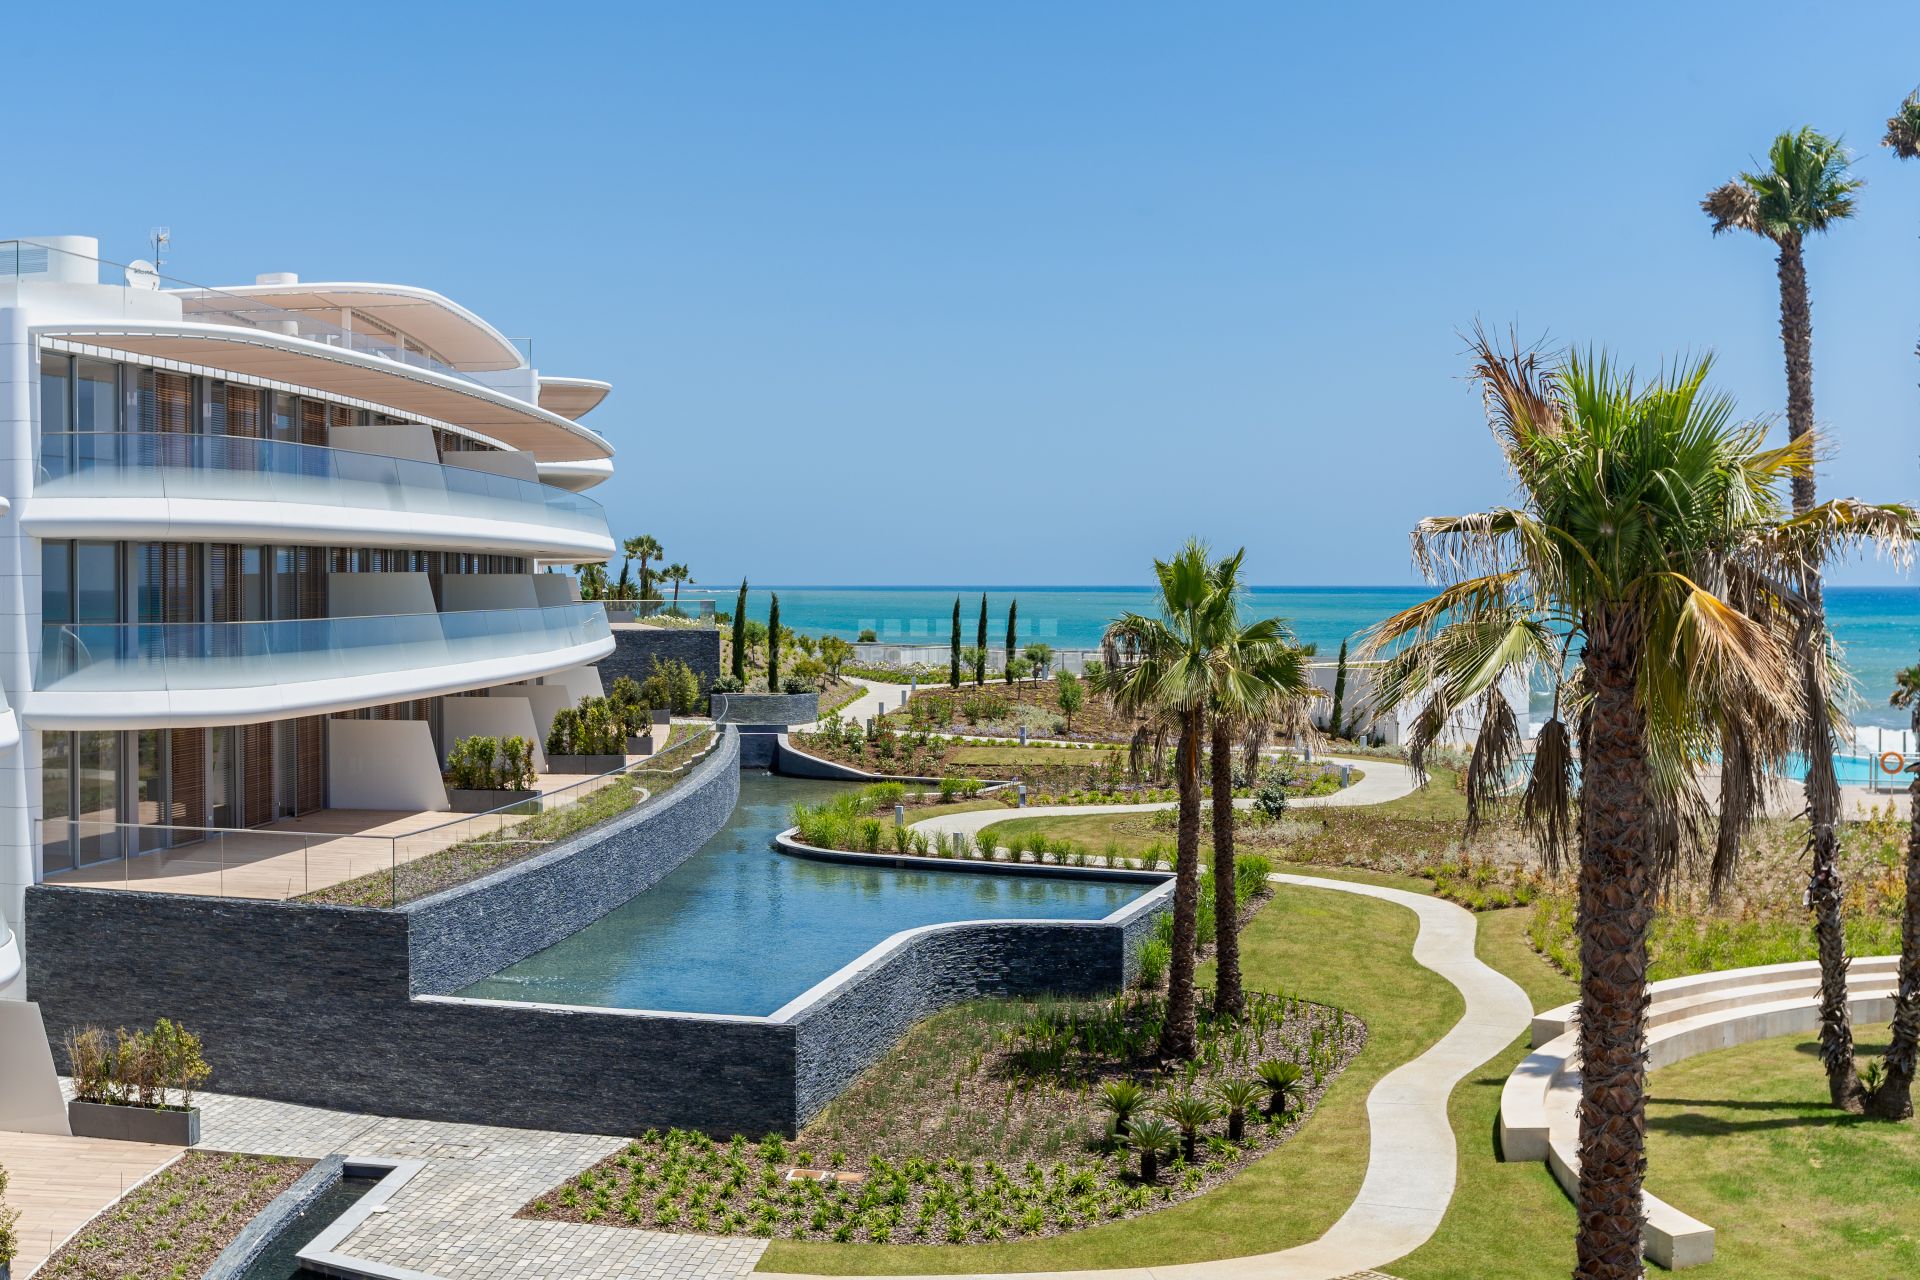 THE EDGE is a privileged project of almost 10.000m2 in a unique beachfront space